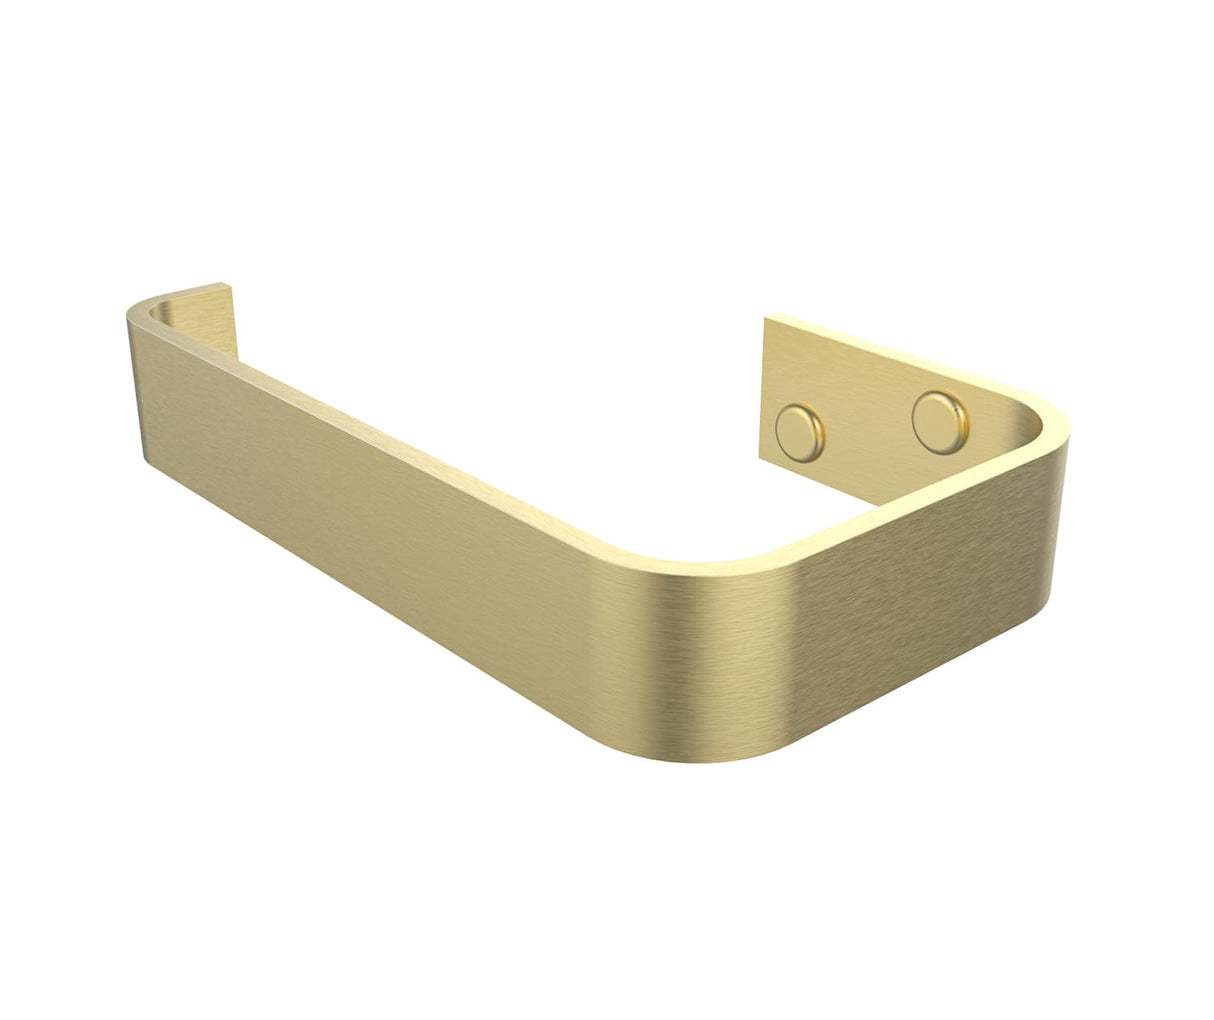 Swanstone Odile Suite Toilet Paper Holder in Brushed Gold TPH10045086.343